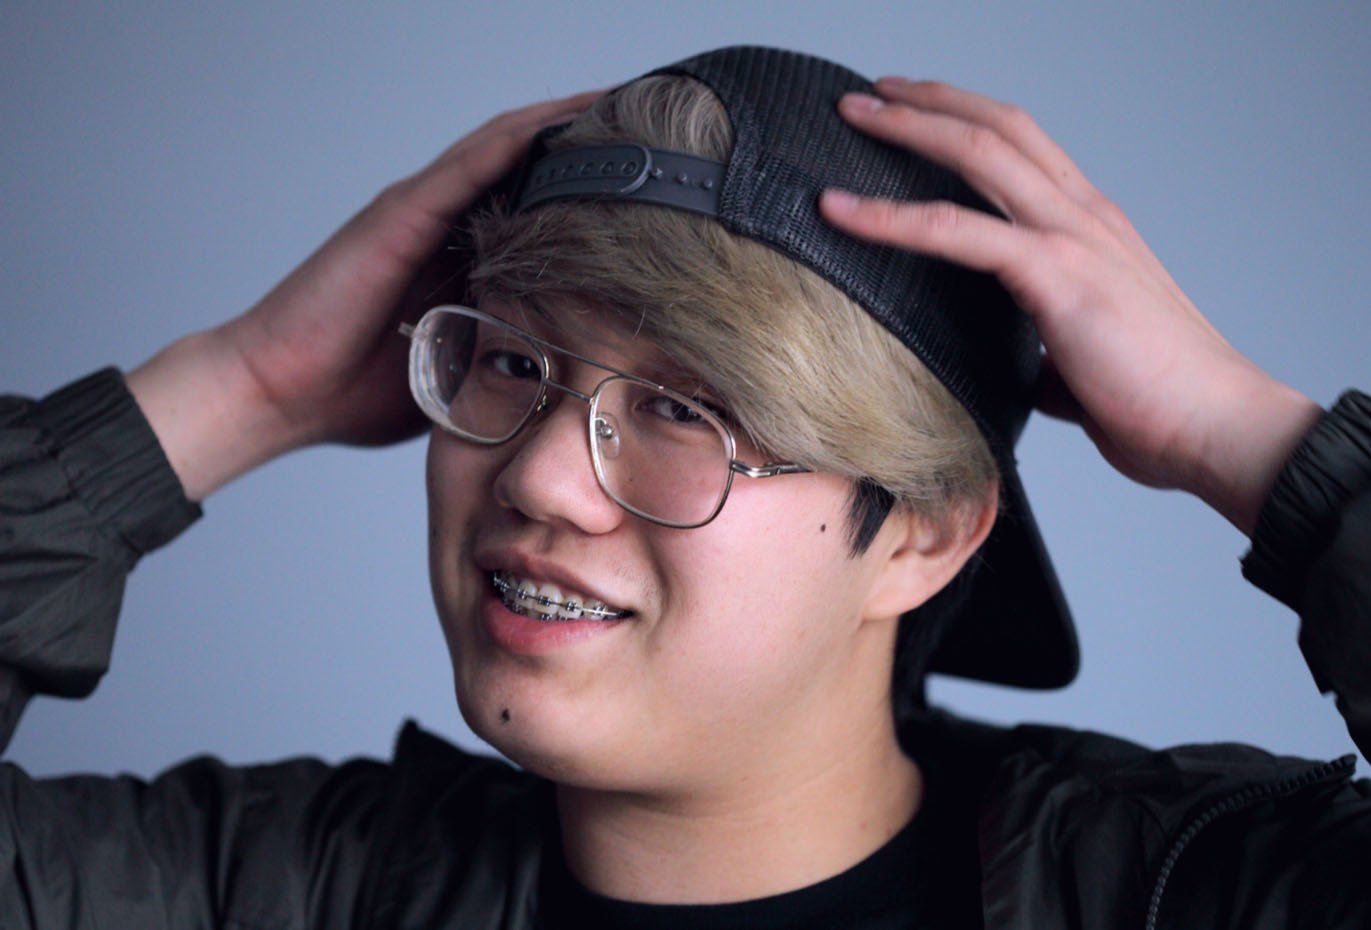 A young man with braces on his teeth is wearing a hat and glasses